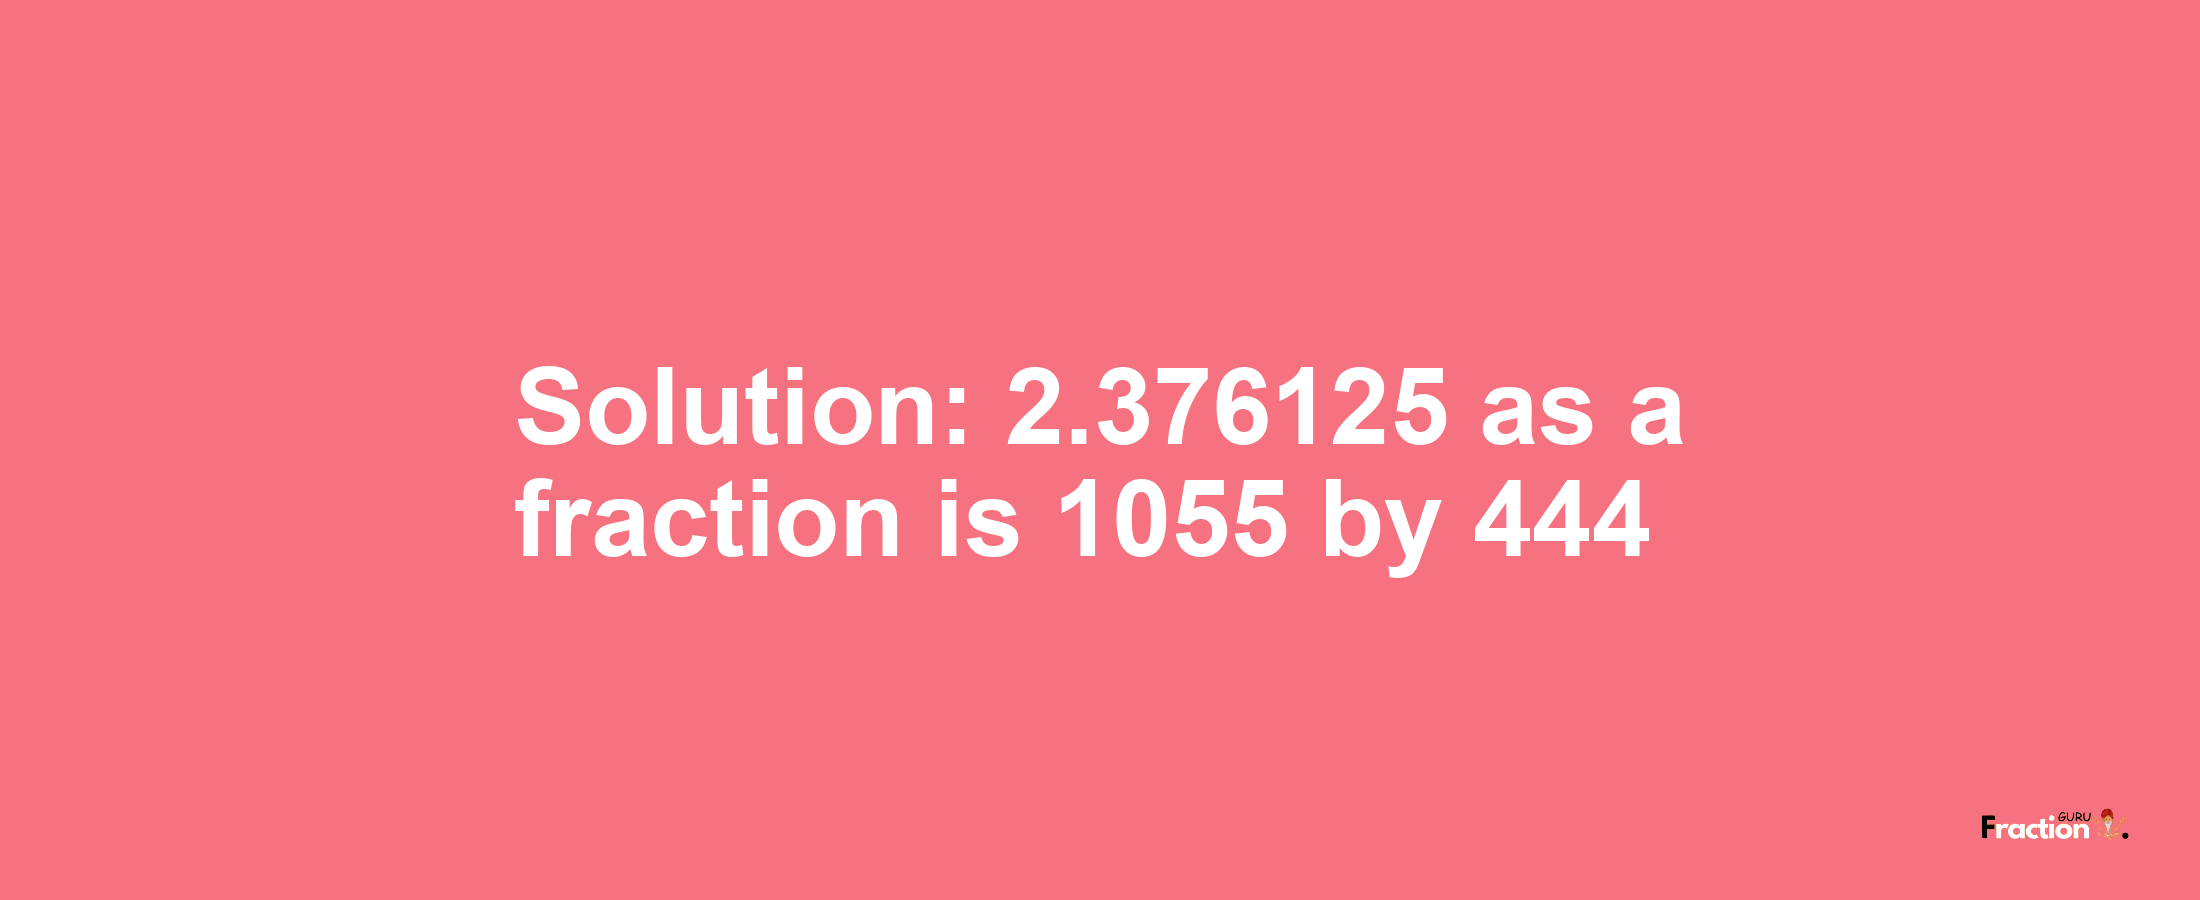 Solution:2.376125 as a fraction is 1055/444